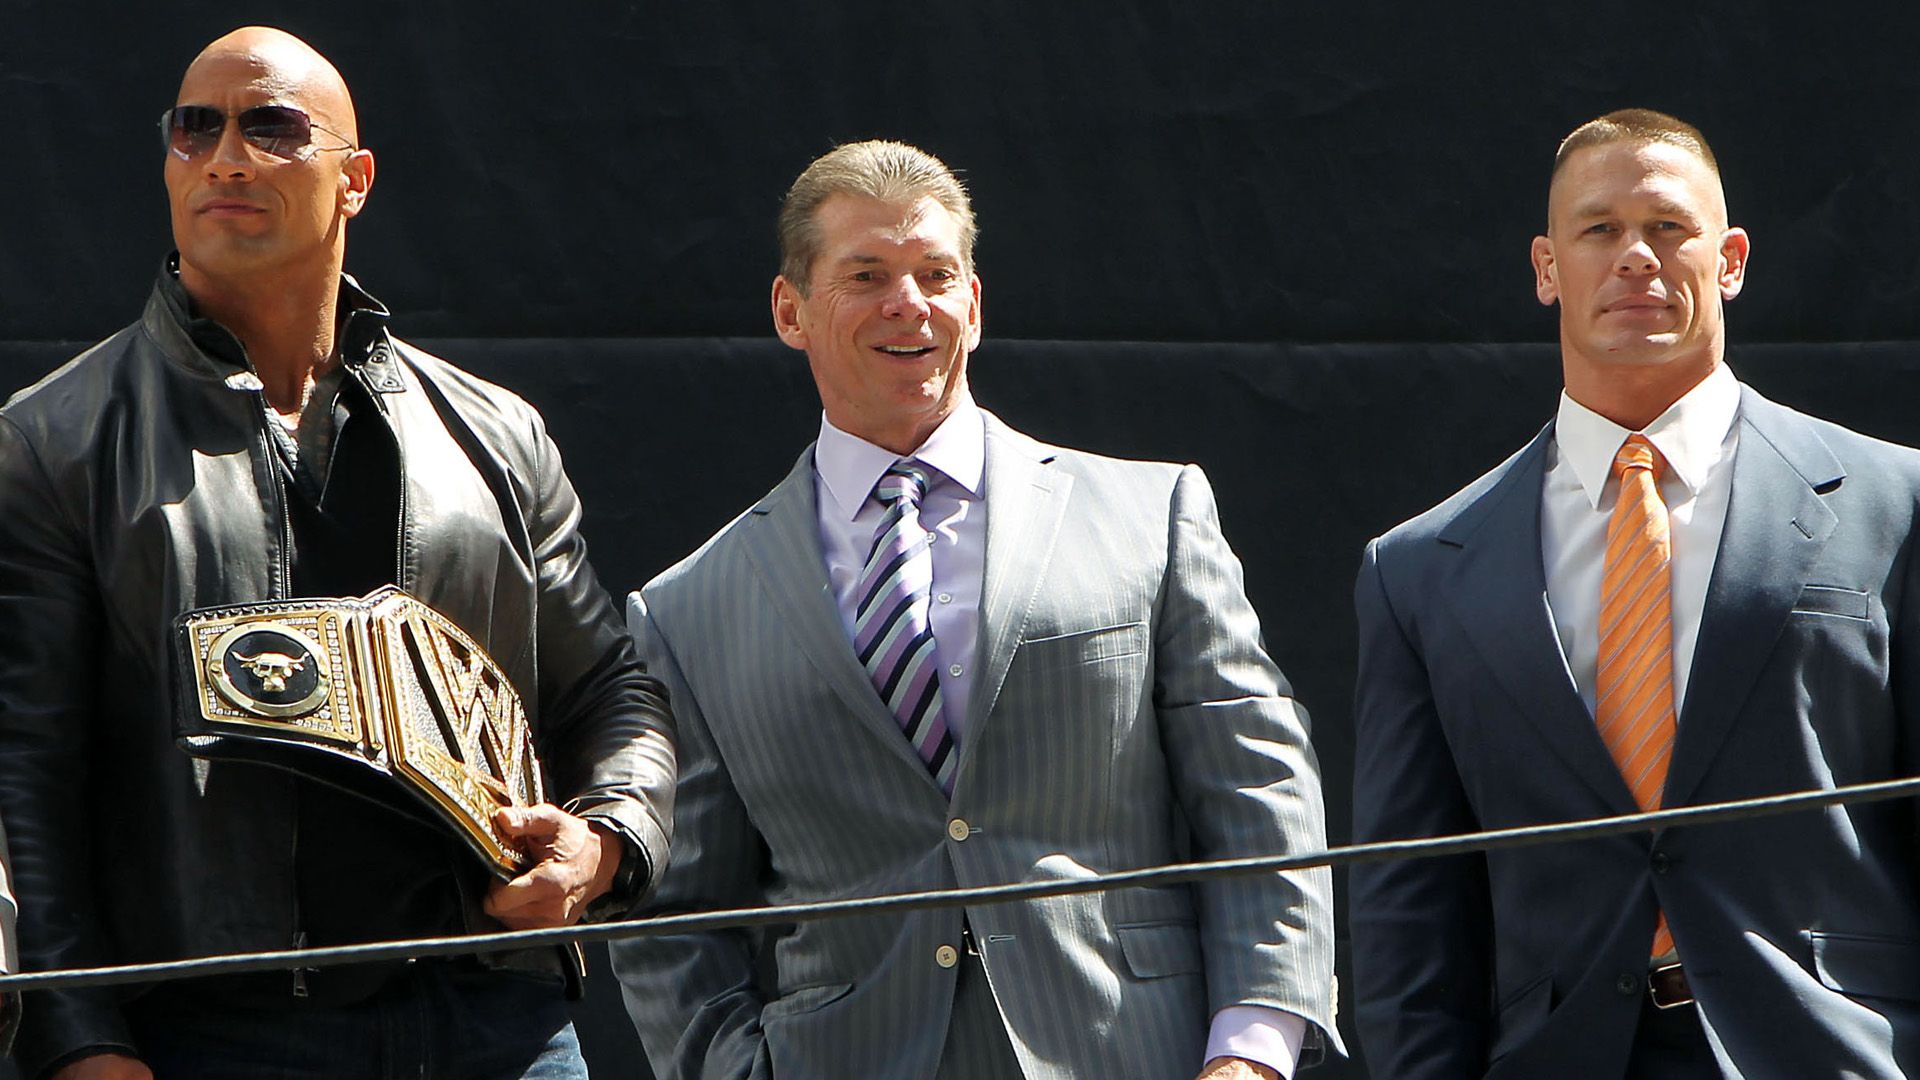 Vince McMahon berates Liverpool fans during WWE Smackdown taping